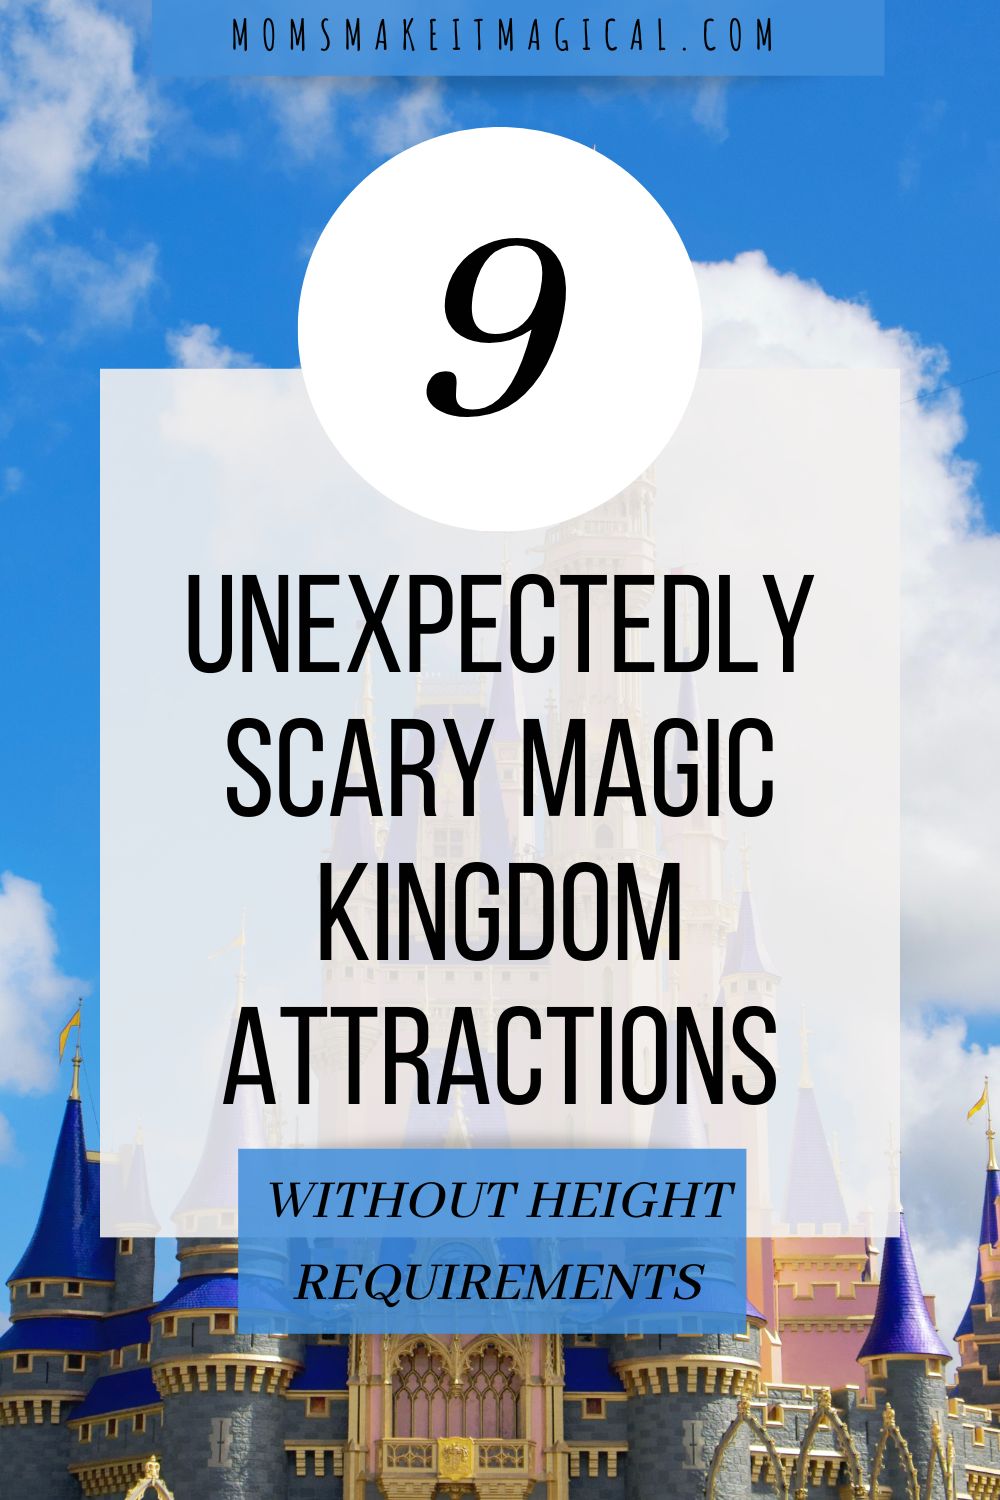 Image of Cinderella Castle at Disney's Magic Kingdom. Text overlay reads "9 unexpectedly scary magic kingdom attractions without height requirements". From moms make it magical dot com.